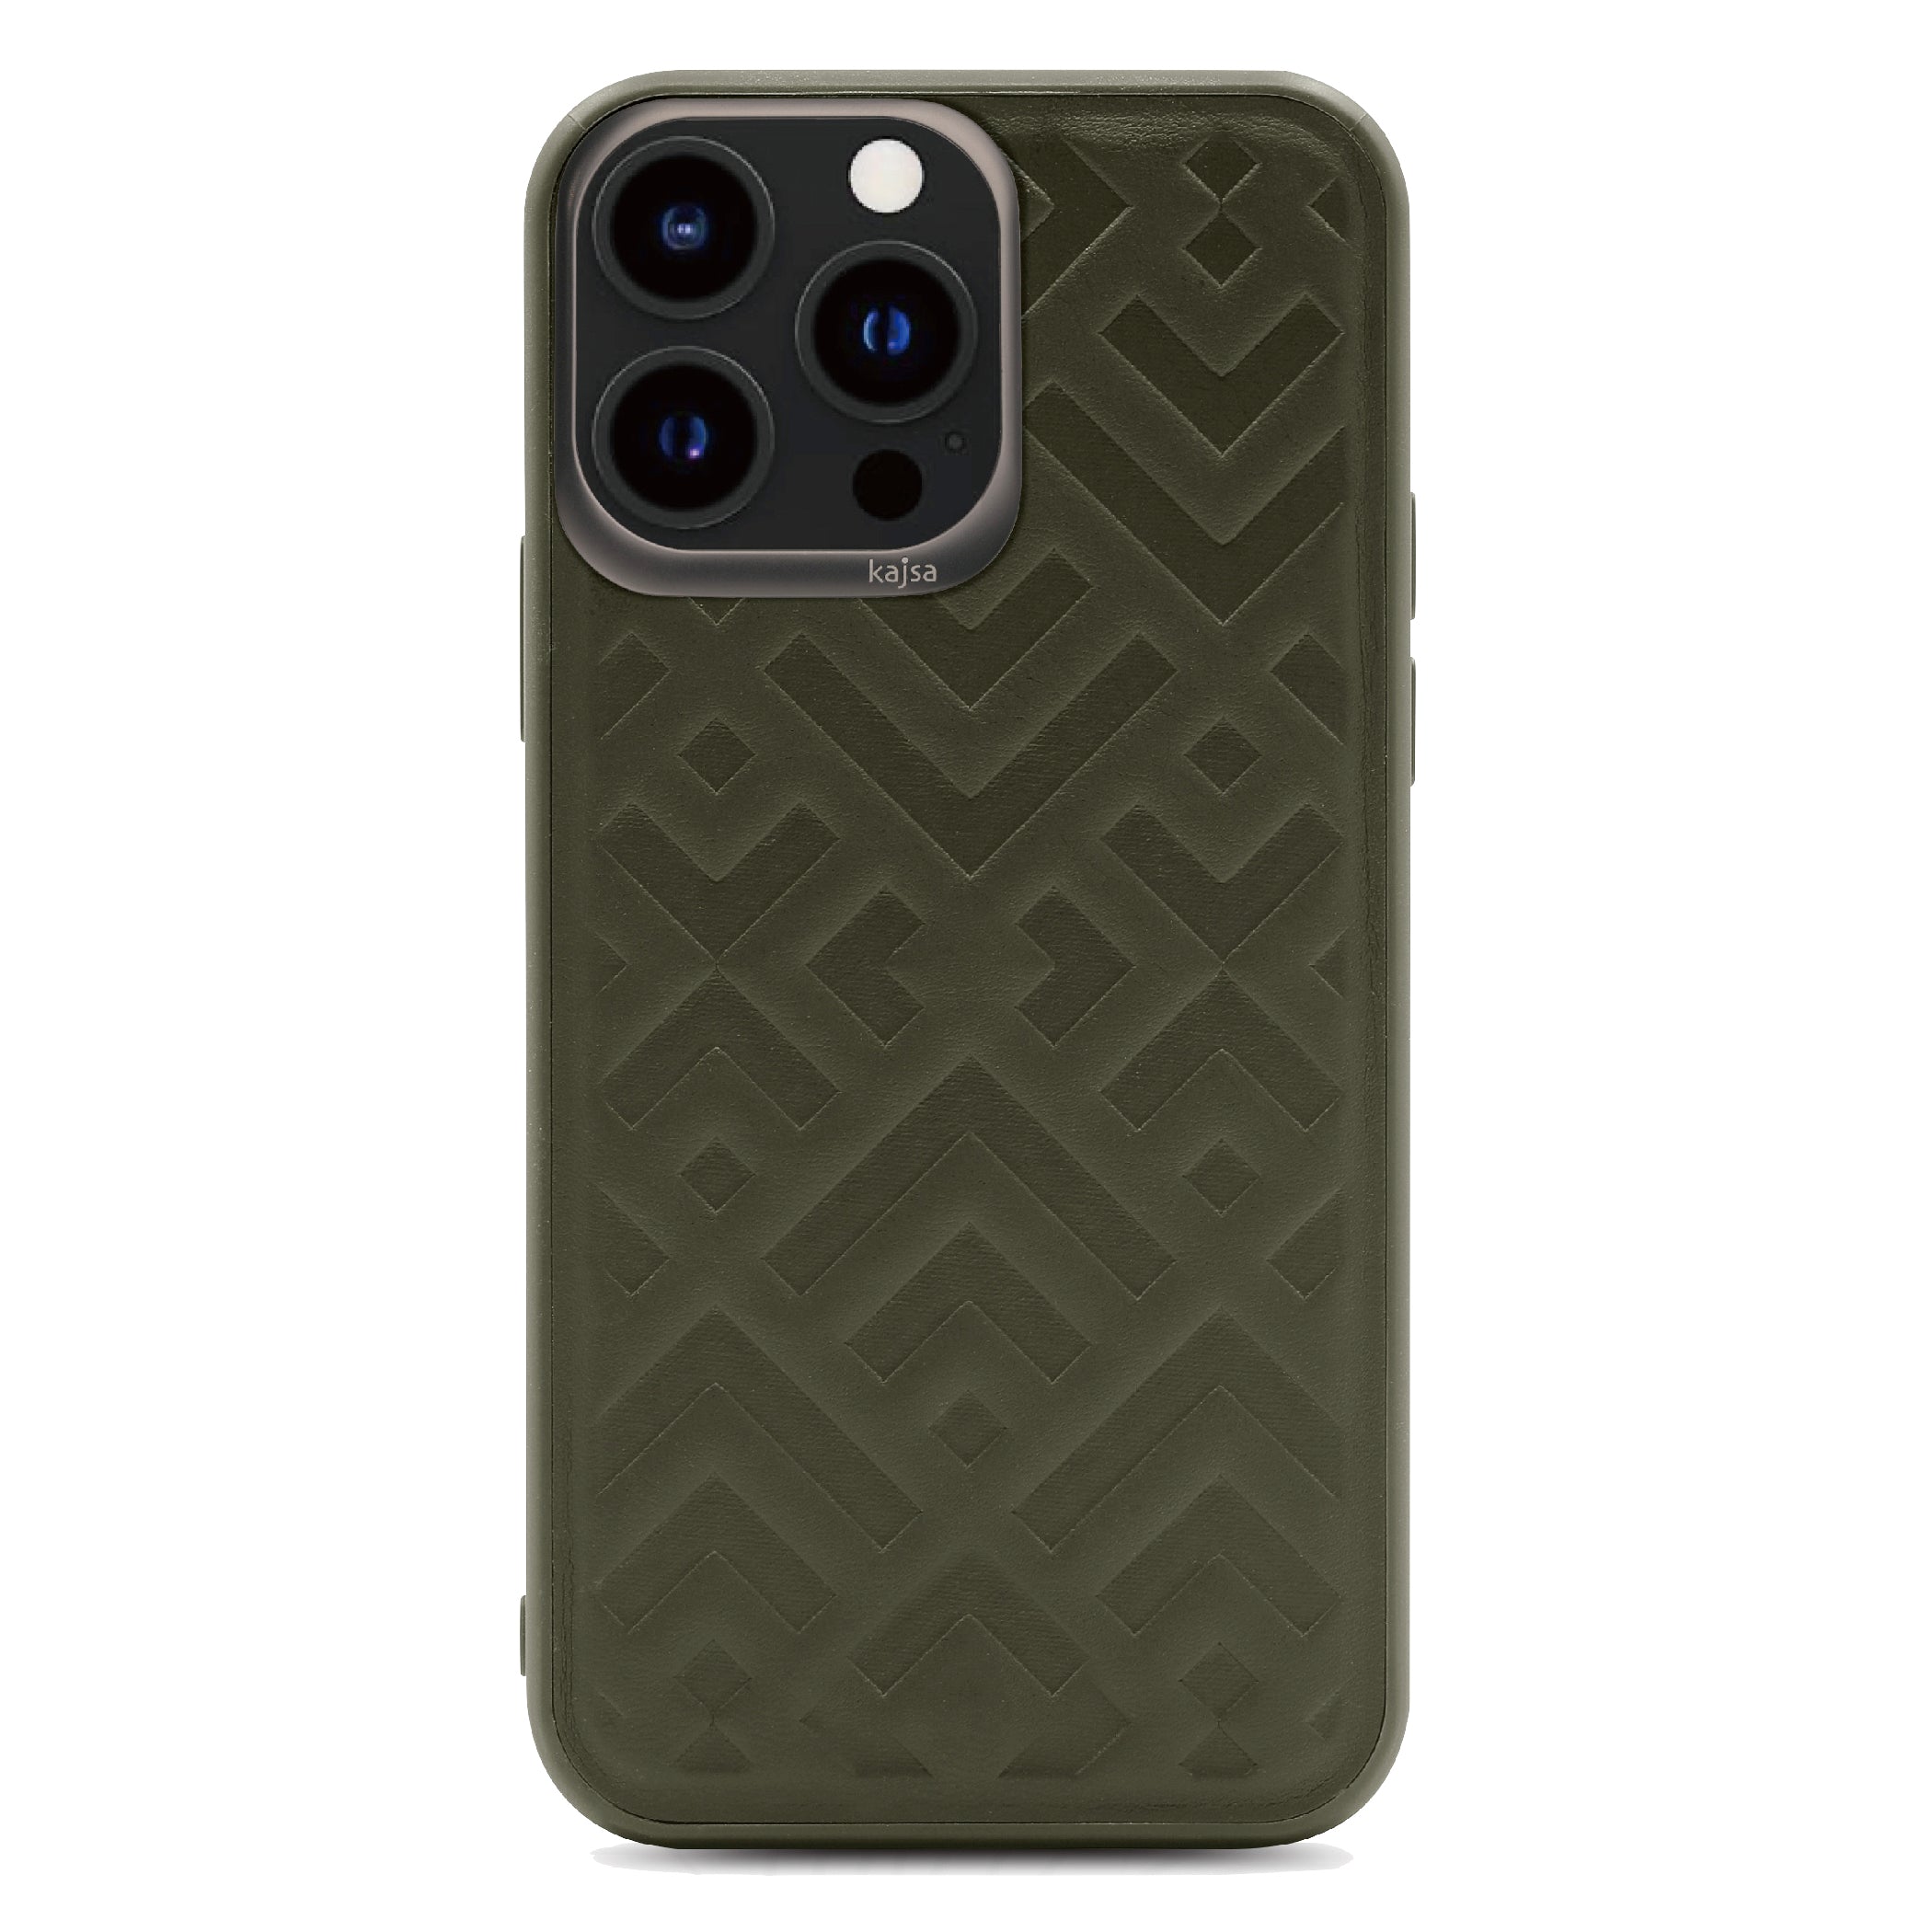 Briquette Collection - Rhombus Back Case for iPhone 13-Phone Case- phone case - phone cases- phone cover- iphone cover- iphone case- iphone cases- leather case- leather cases- DIYCASE - custom case - leather cover - hand strap case - croco pattern case - snake pattern case - carbon fiber phone case - phone case brand - unique phone case - high quality - phone case brand - protective case - buy phone case hong kong - online buy phone case - iphone‎手機殼 - 客製化手機殼 - samsung ‎手機殼 - 香港手機殼 - 買電話殼